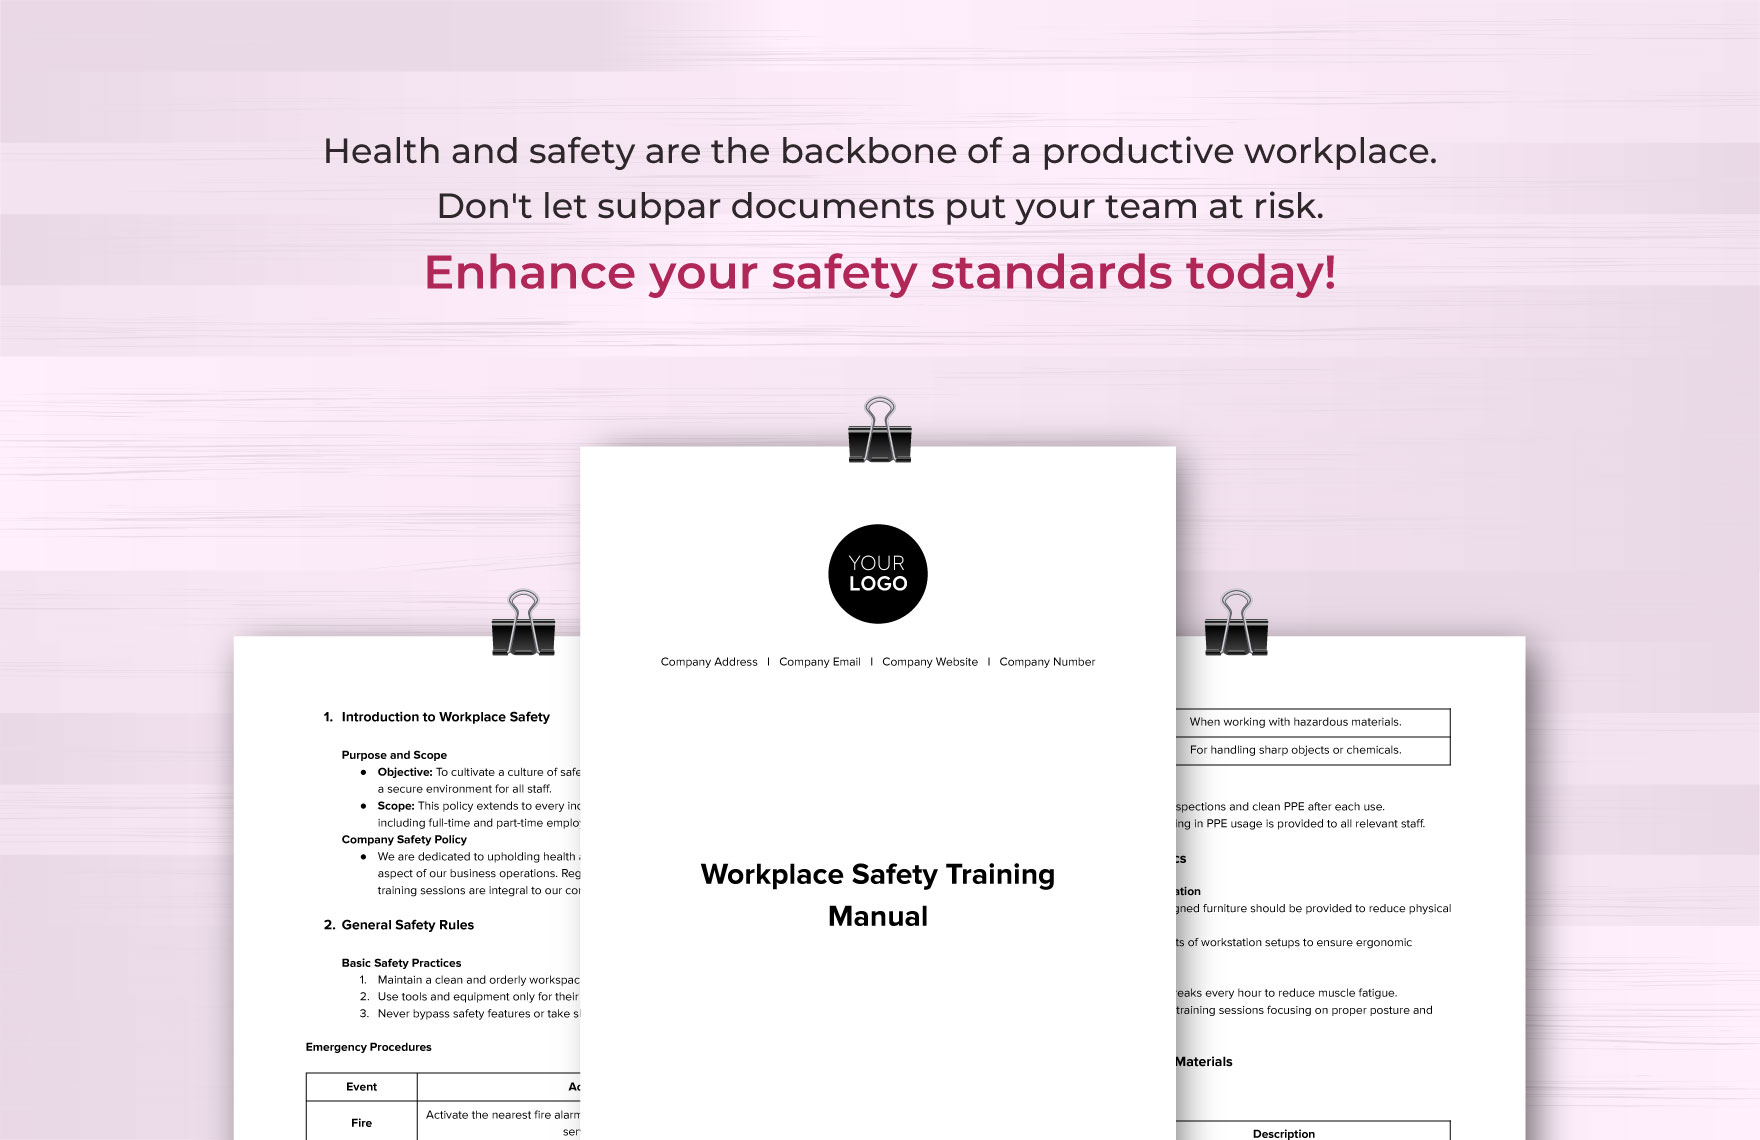 Workplace Safety Training Manual Template